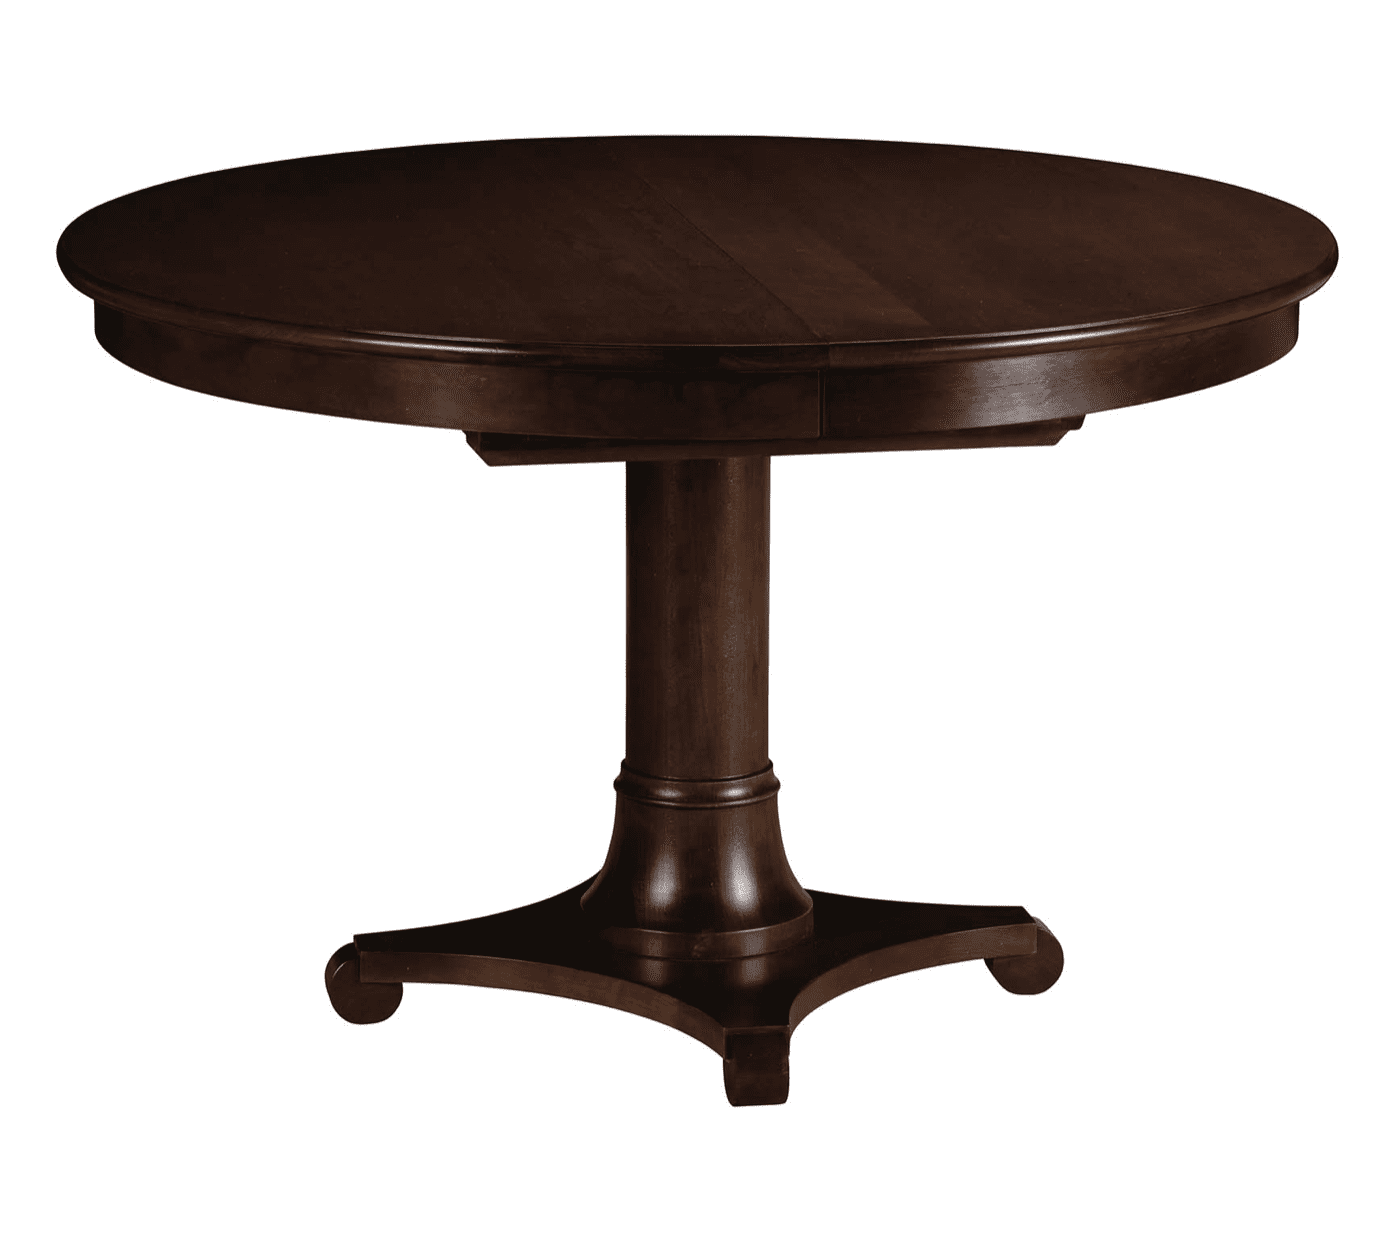 Meyer 42″ Round Pedestal Table with Butterfly Leaf